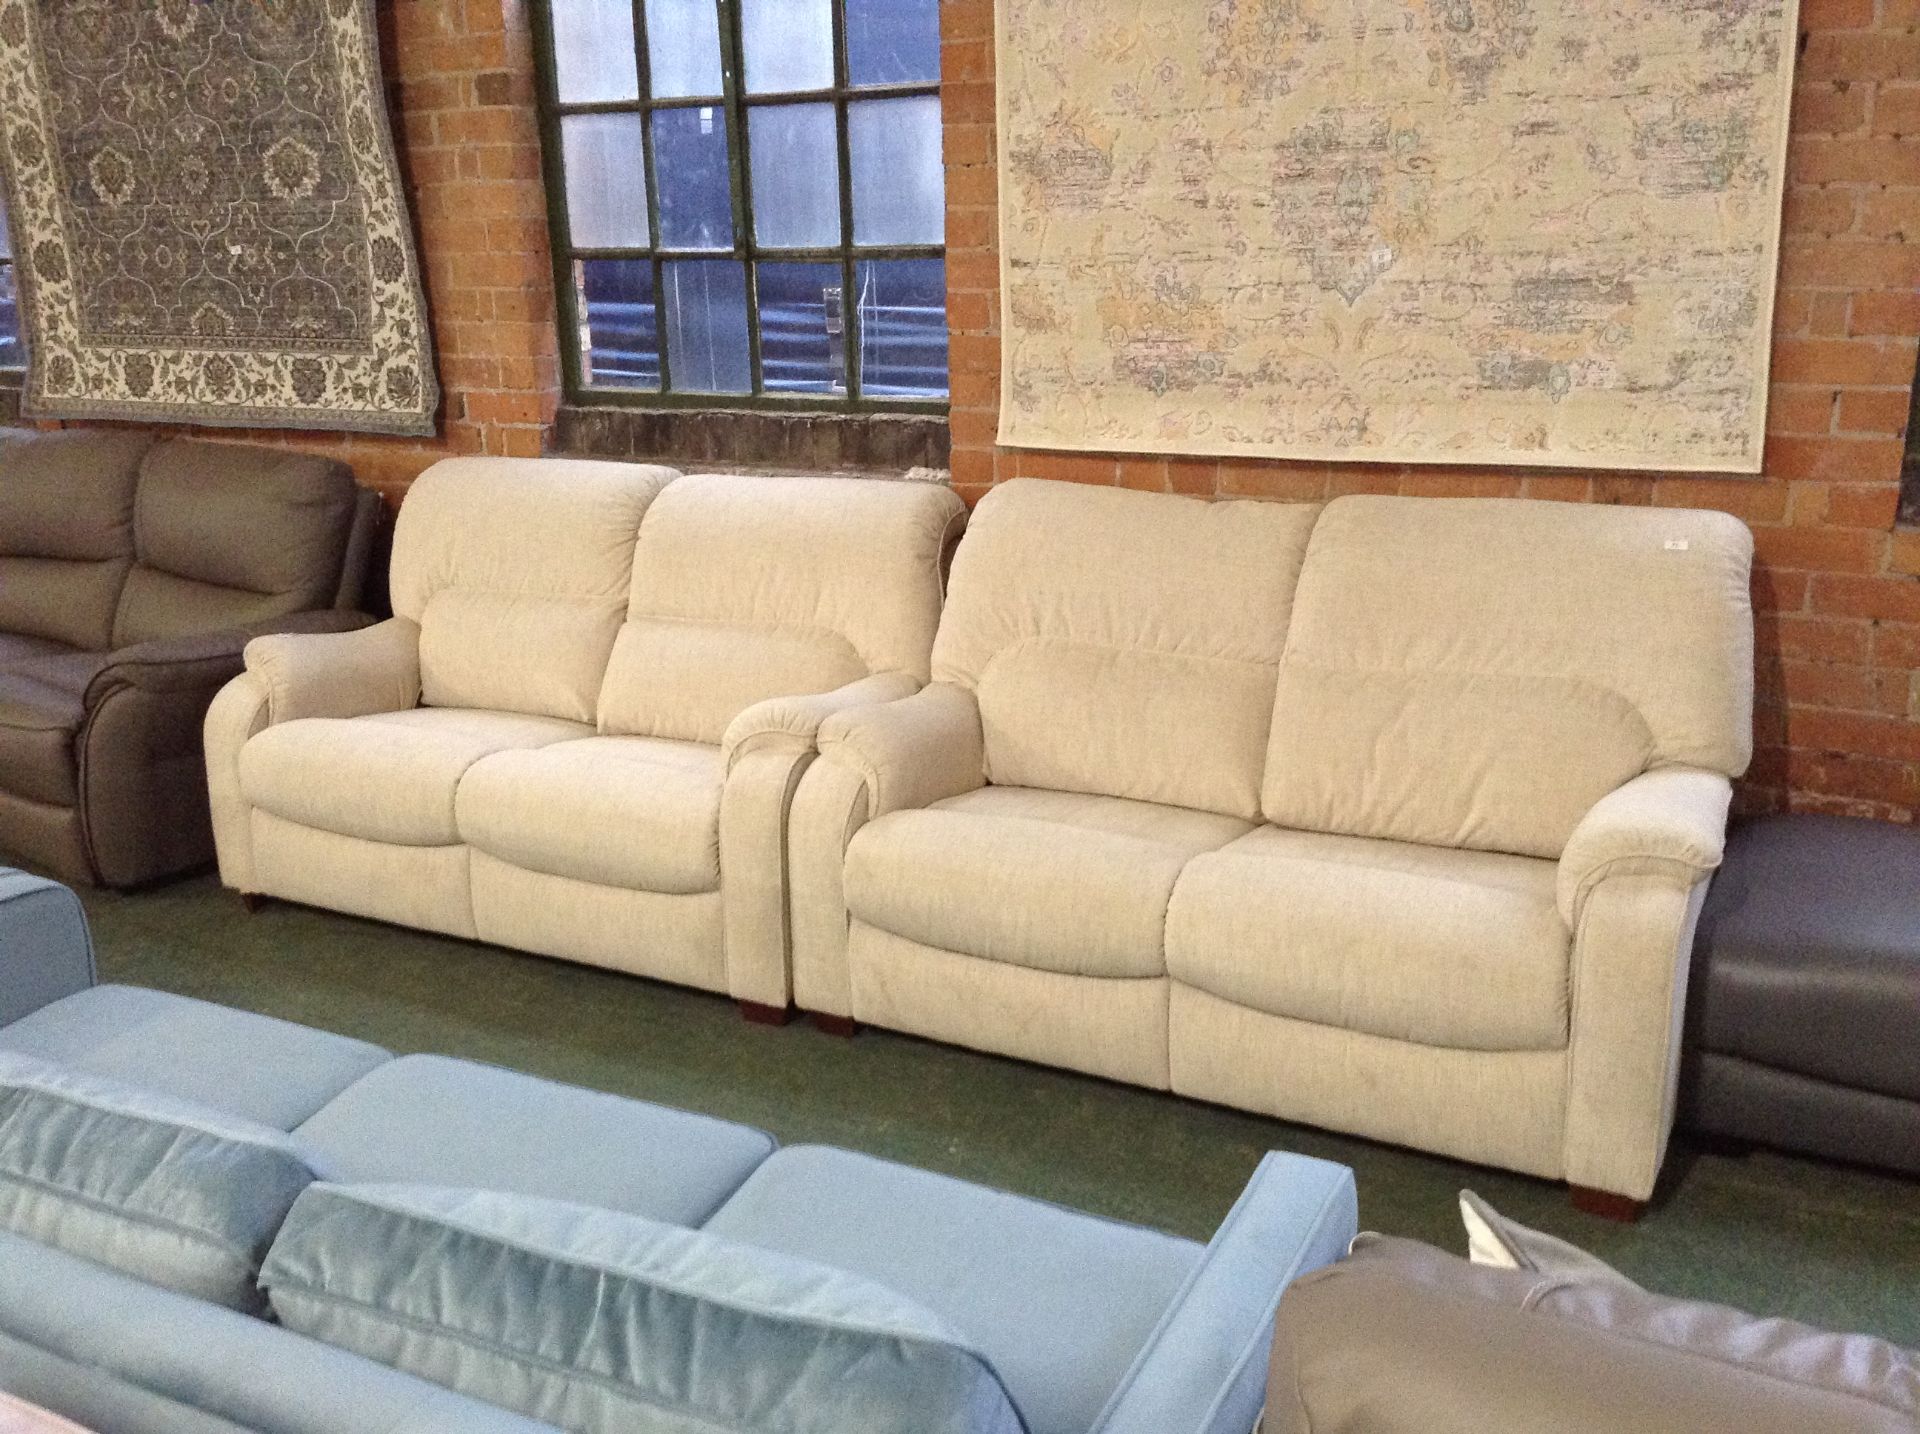 2 x NATURAL HIGH BACK 2.5 SEATER SOFAS (TR000993 W